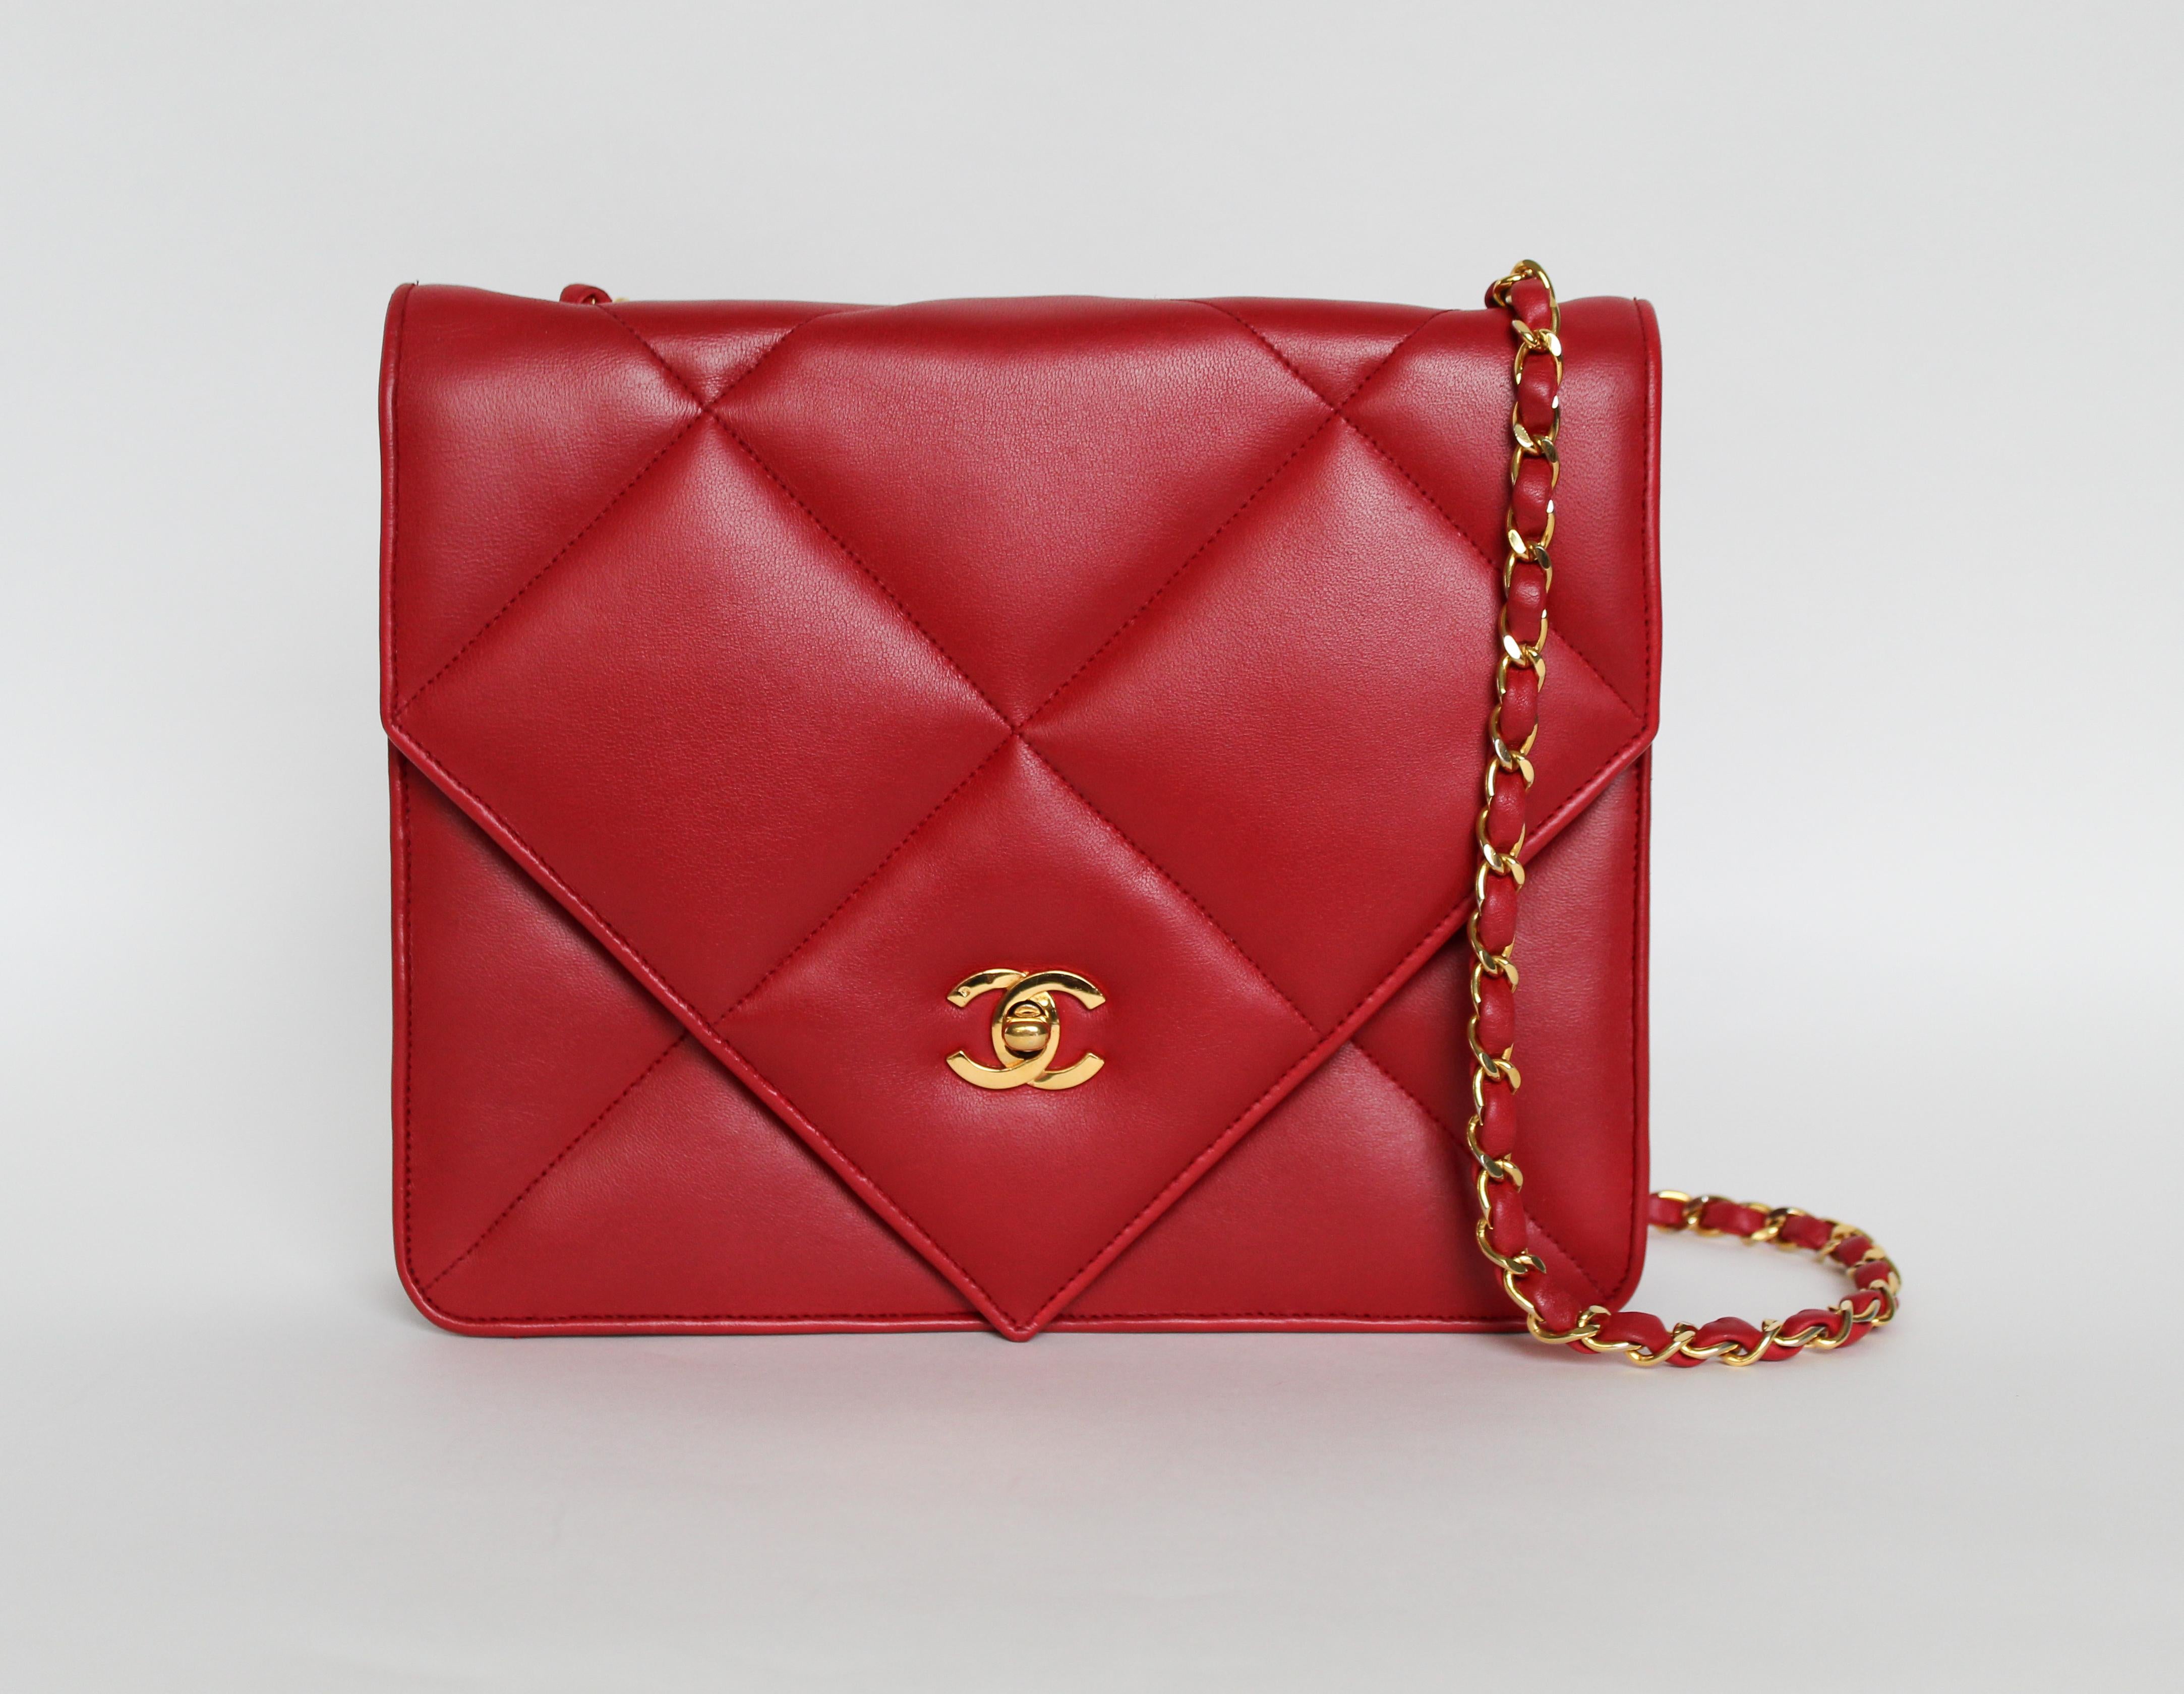 Classic Chanel 19 Vintage Rare 90s Jumbo Lambskin Red Envelope Flap Bag  For Sale 1